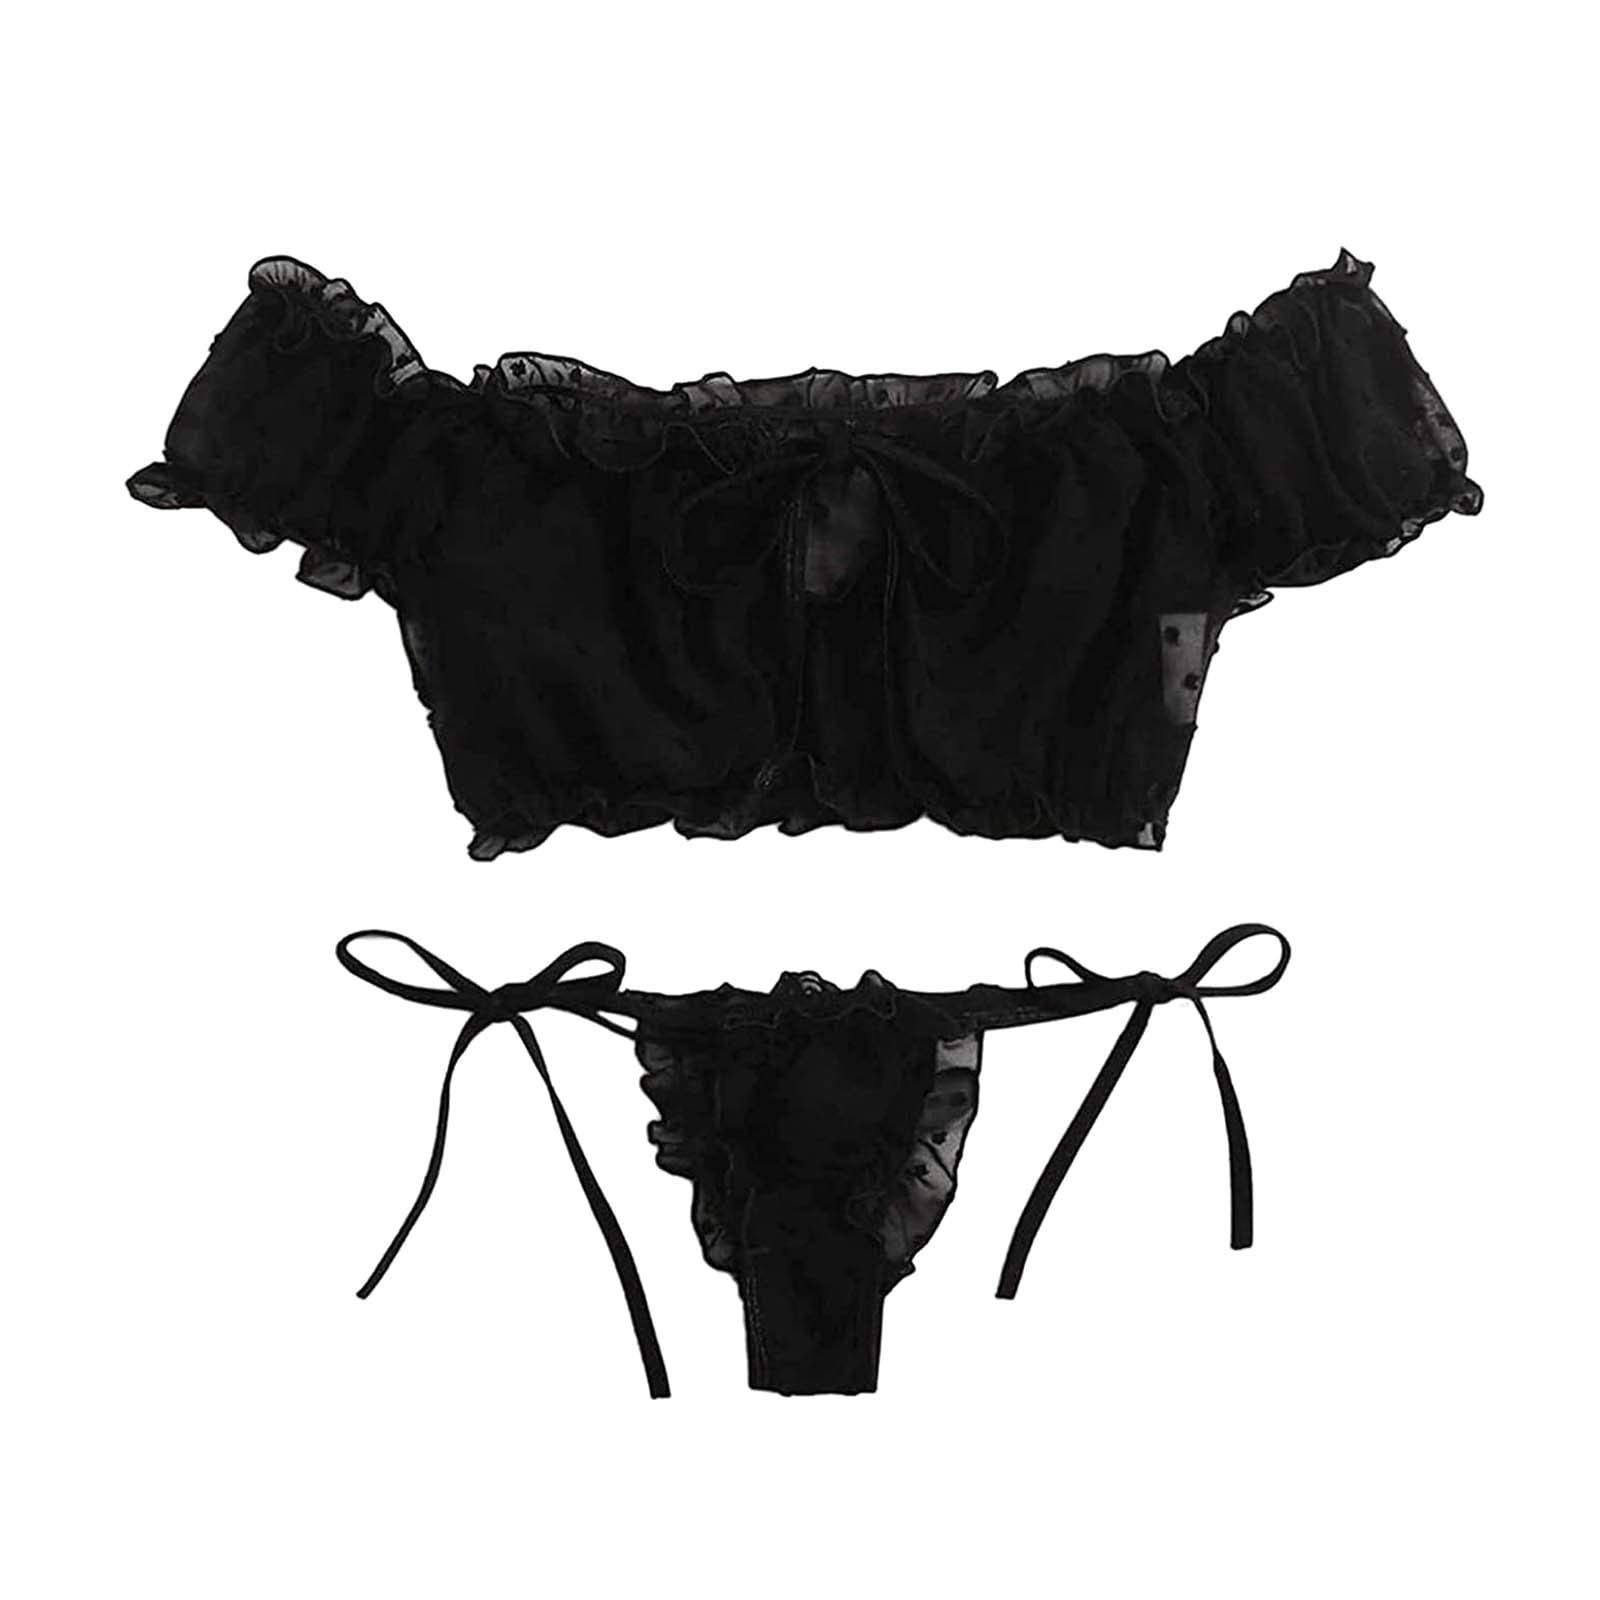 Biziza Women S Mesh Sheer See Through Lingerie Set Sexy Lace Bra And Panty 2 Piece Black